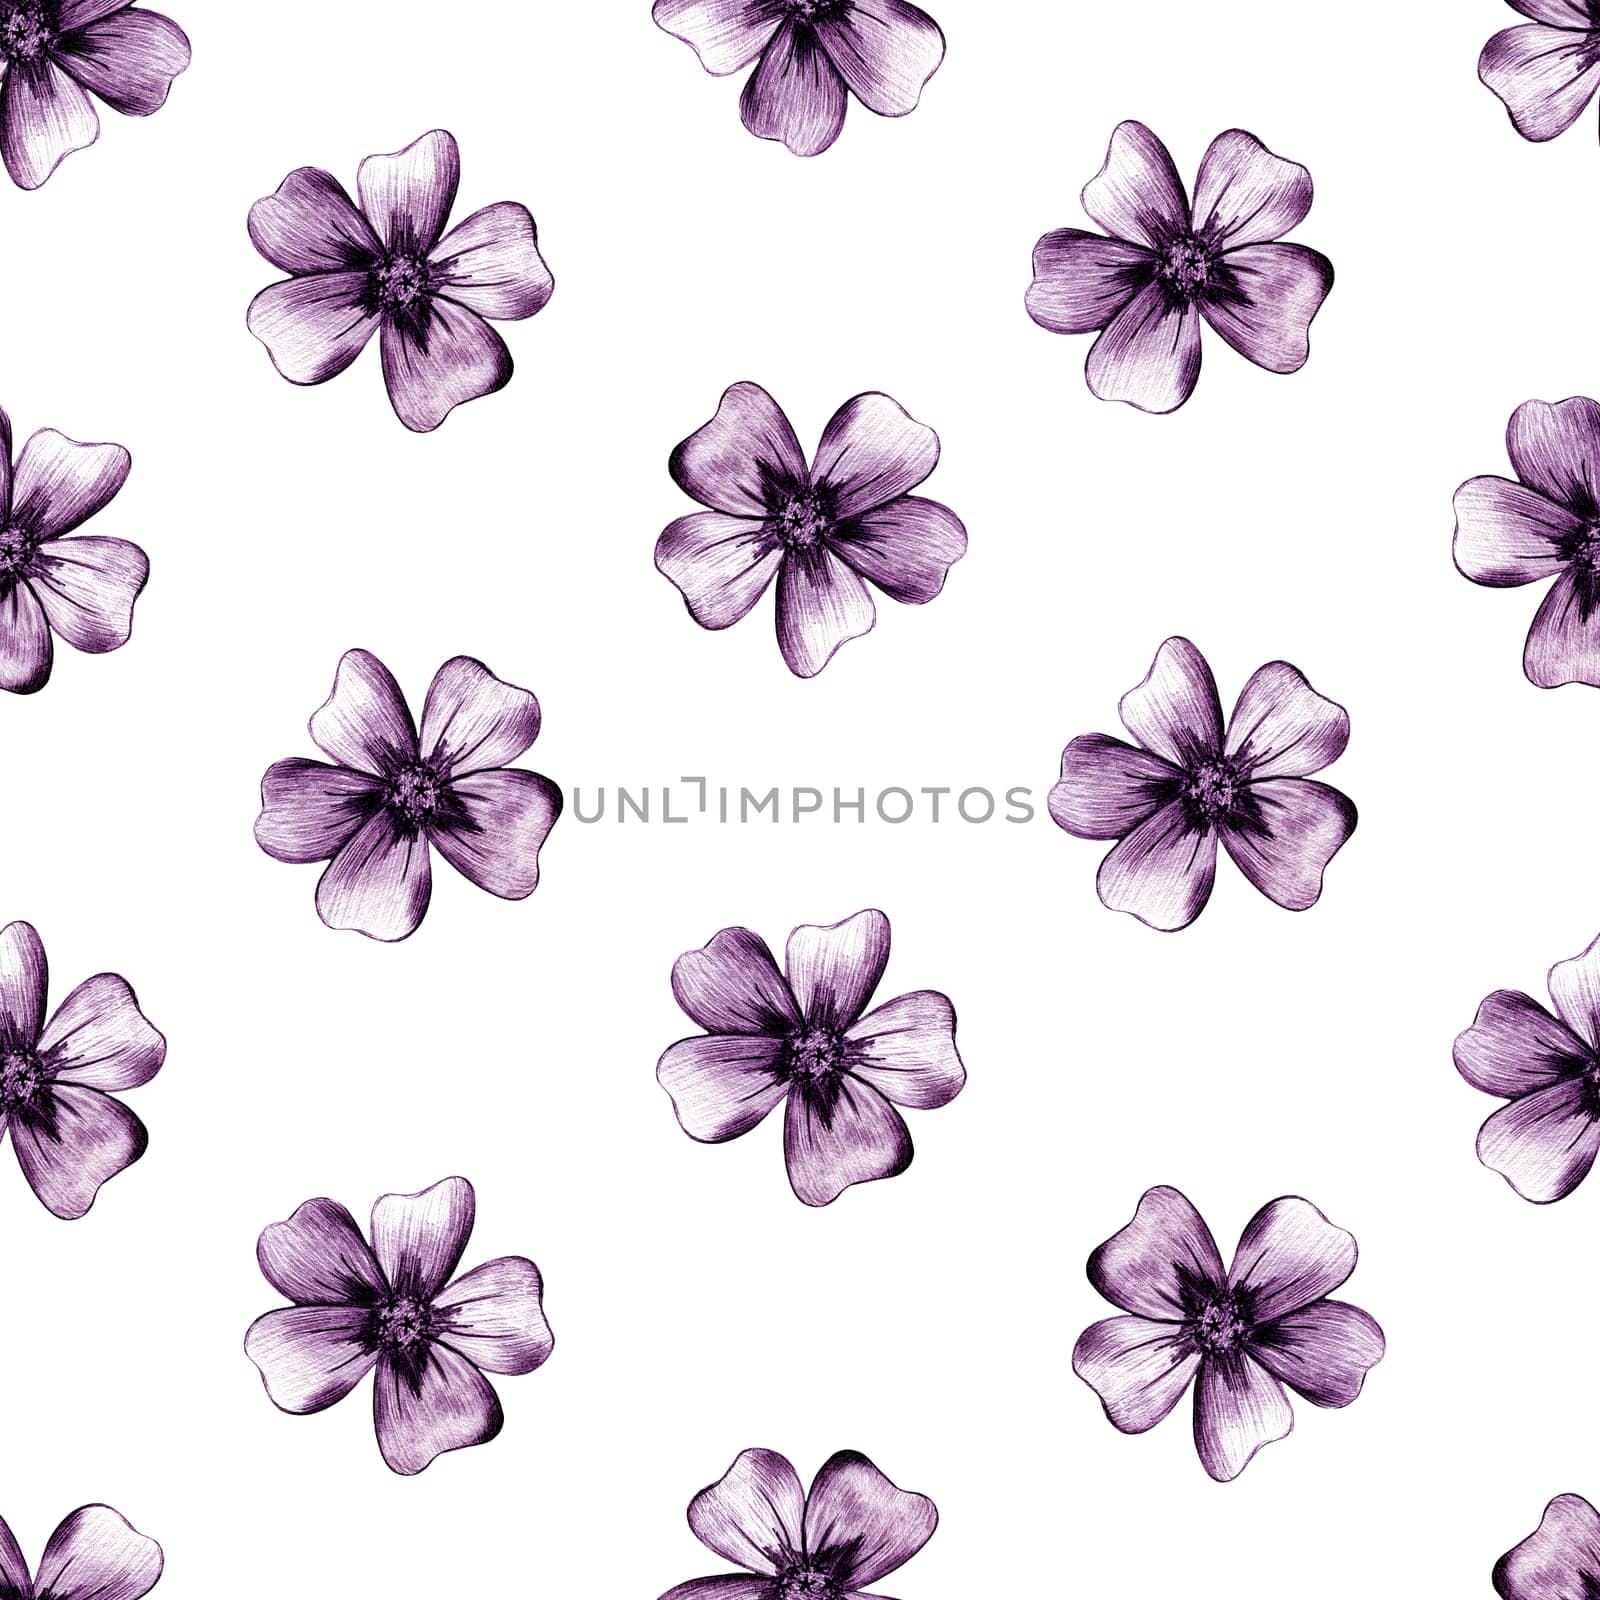 Seamless Pattern with Hand-Drawn Pink Flower. White Background with Thin-leaved Lavender Marigolds for Print, Design, Holiday, Wedding and Birthday Card.